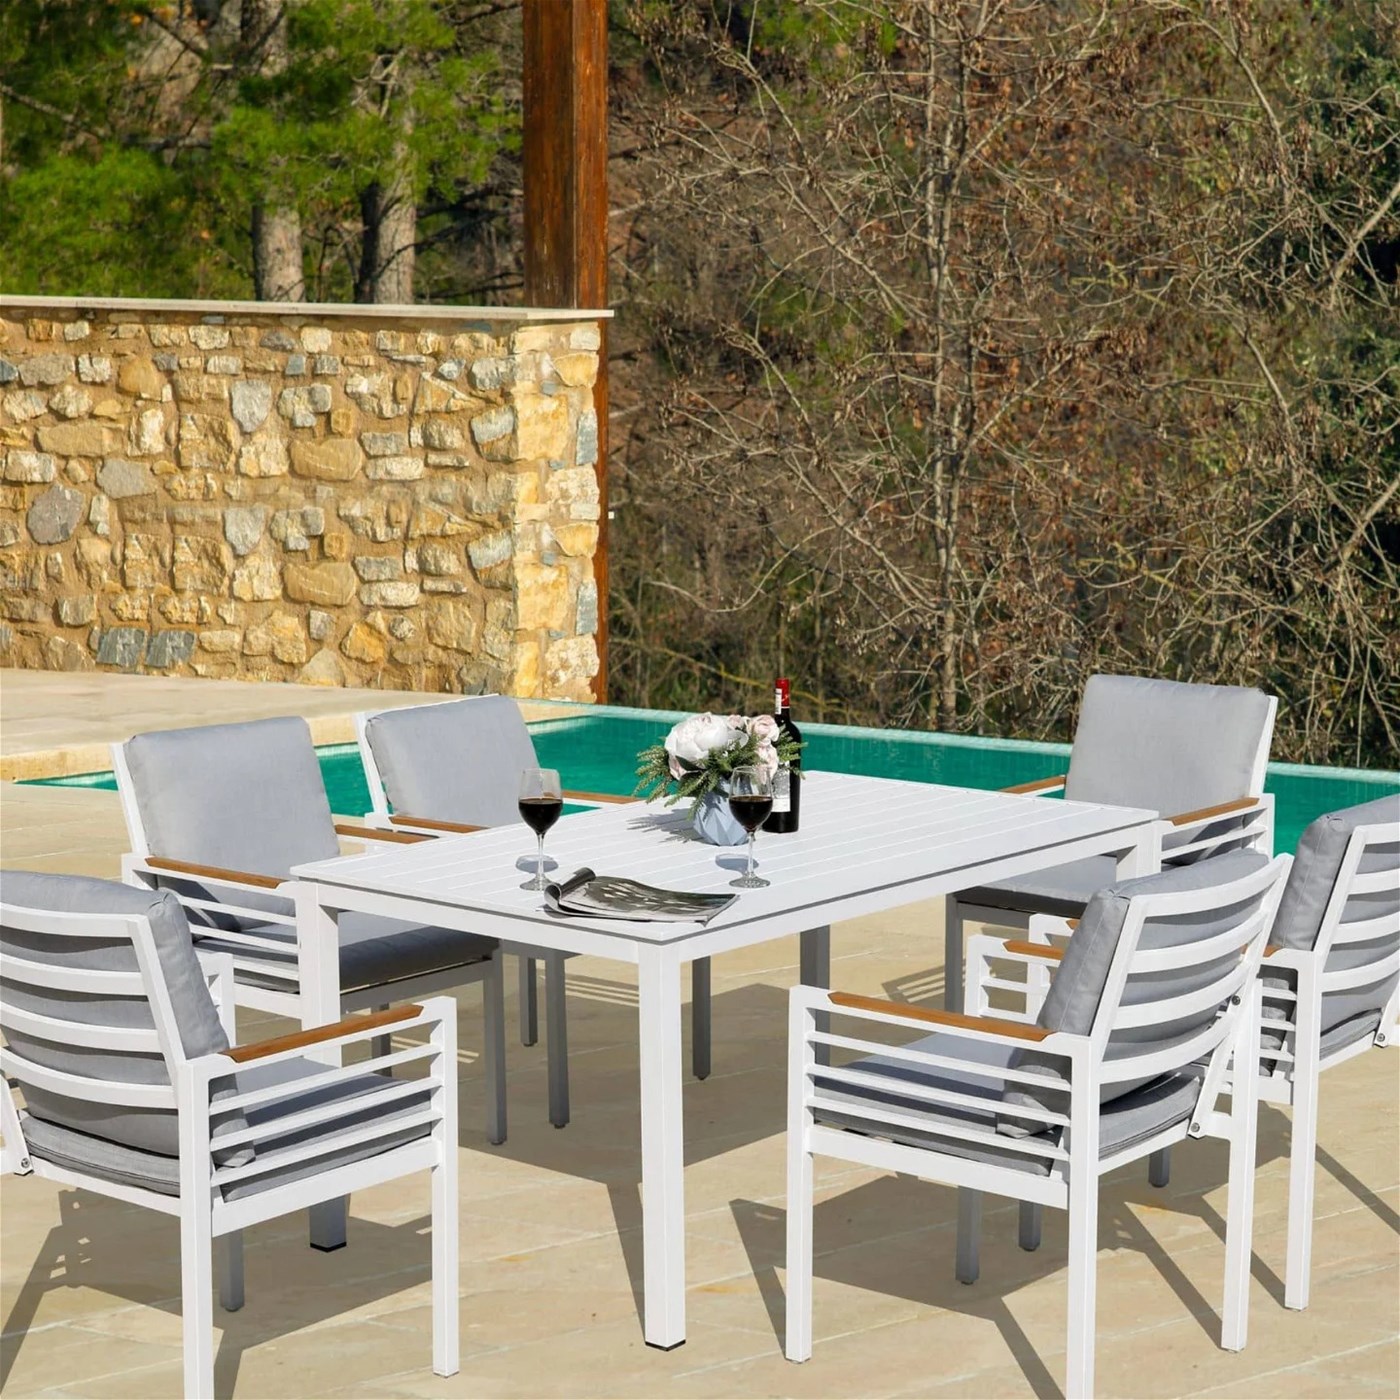 Olan Living Outdoor Furniture table and chairs next to plunge pool